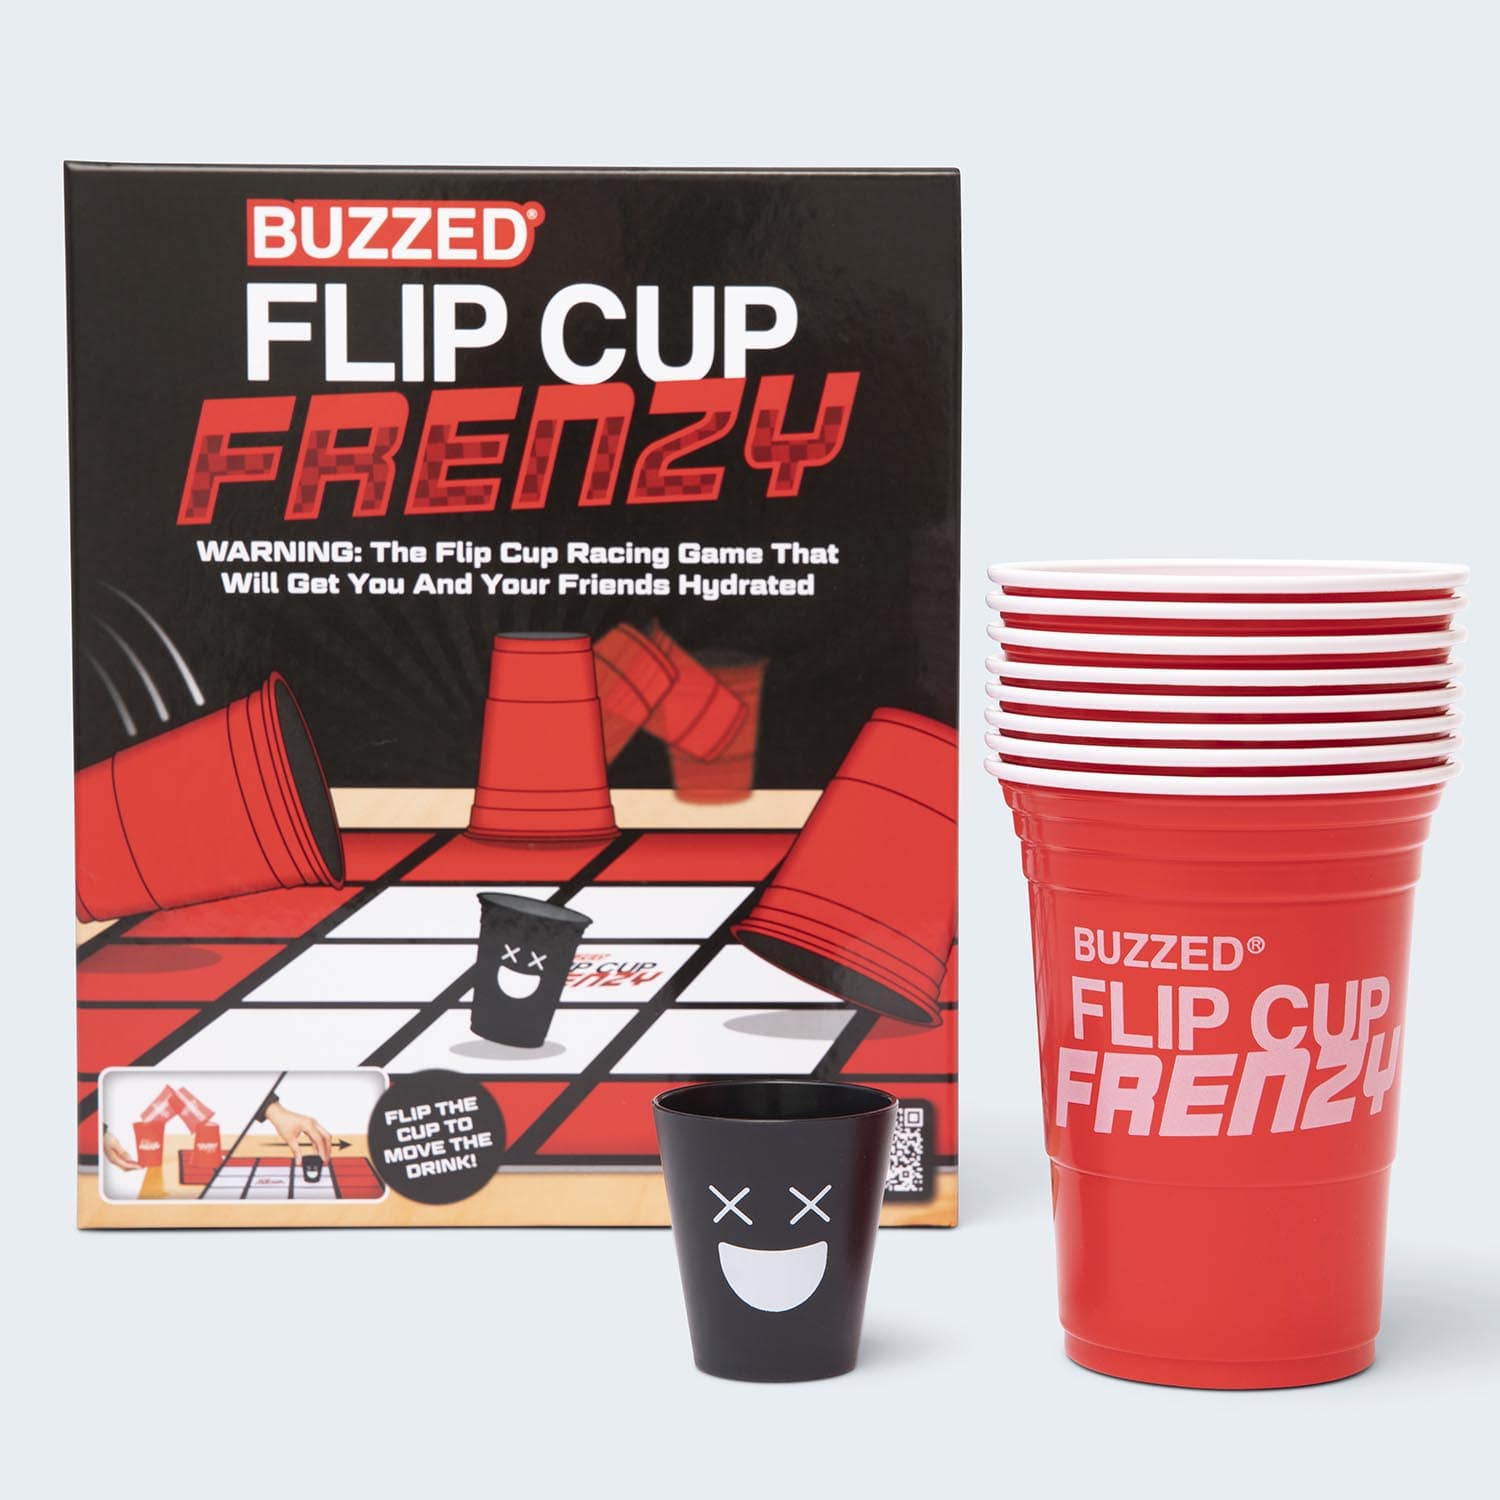 buzzed-flip-cup-frenzy-game-box-and-game-play-03-what-do-you-meme-by-relatable